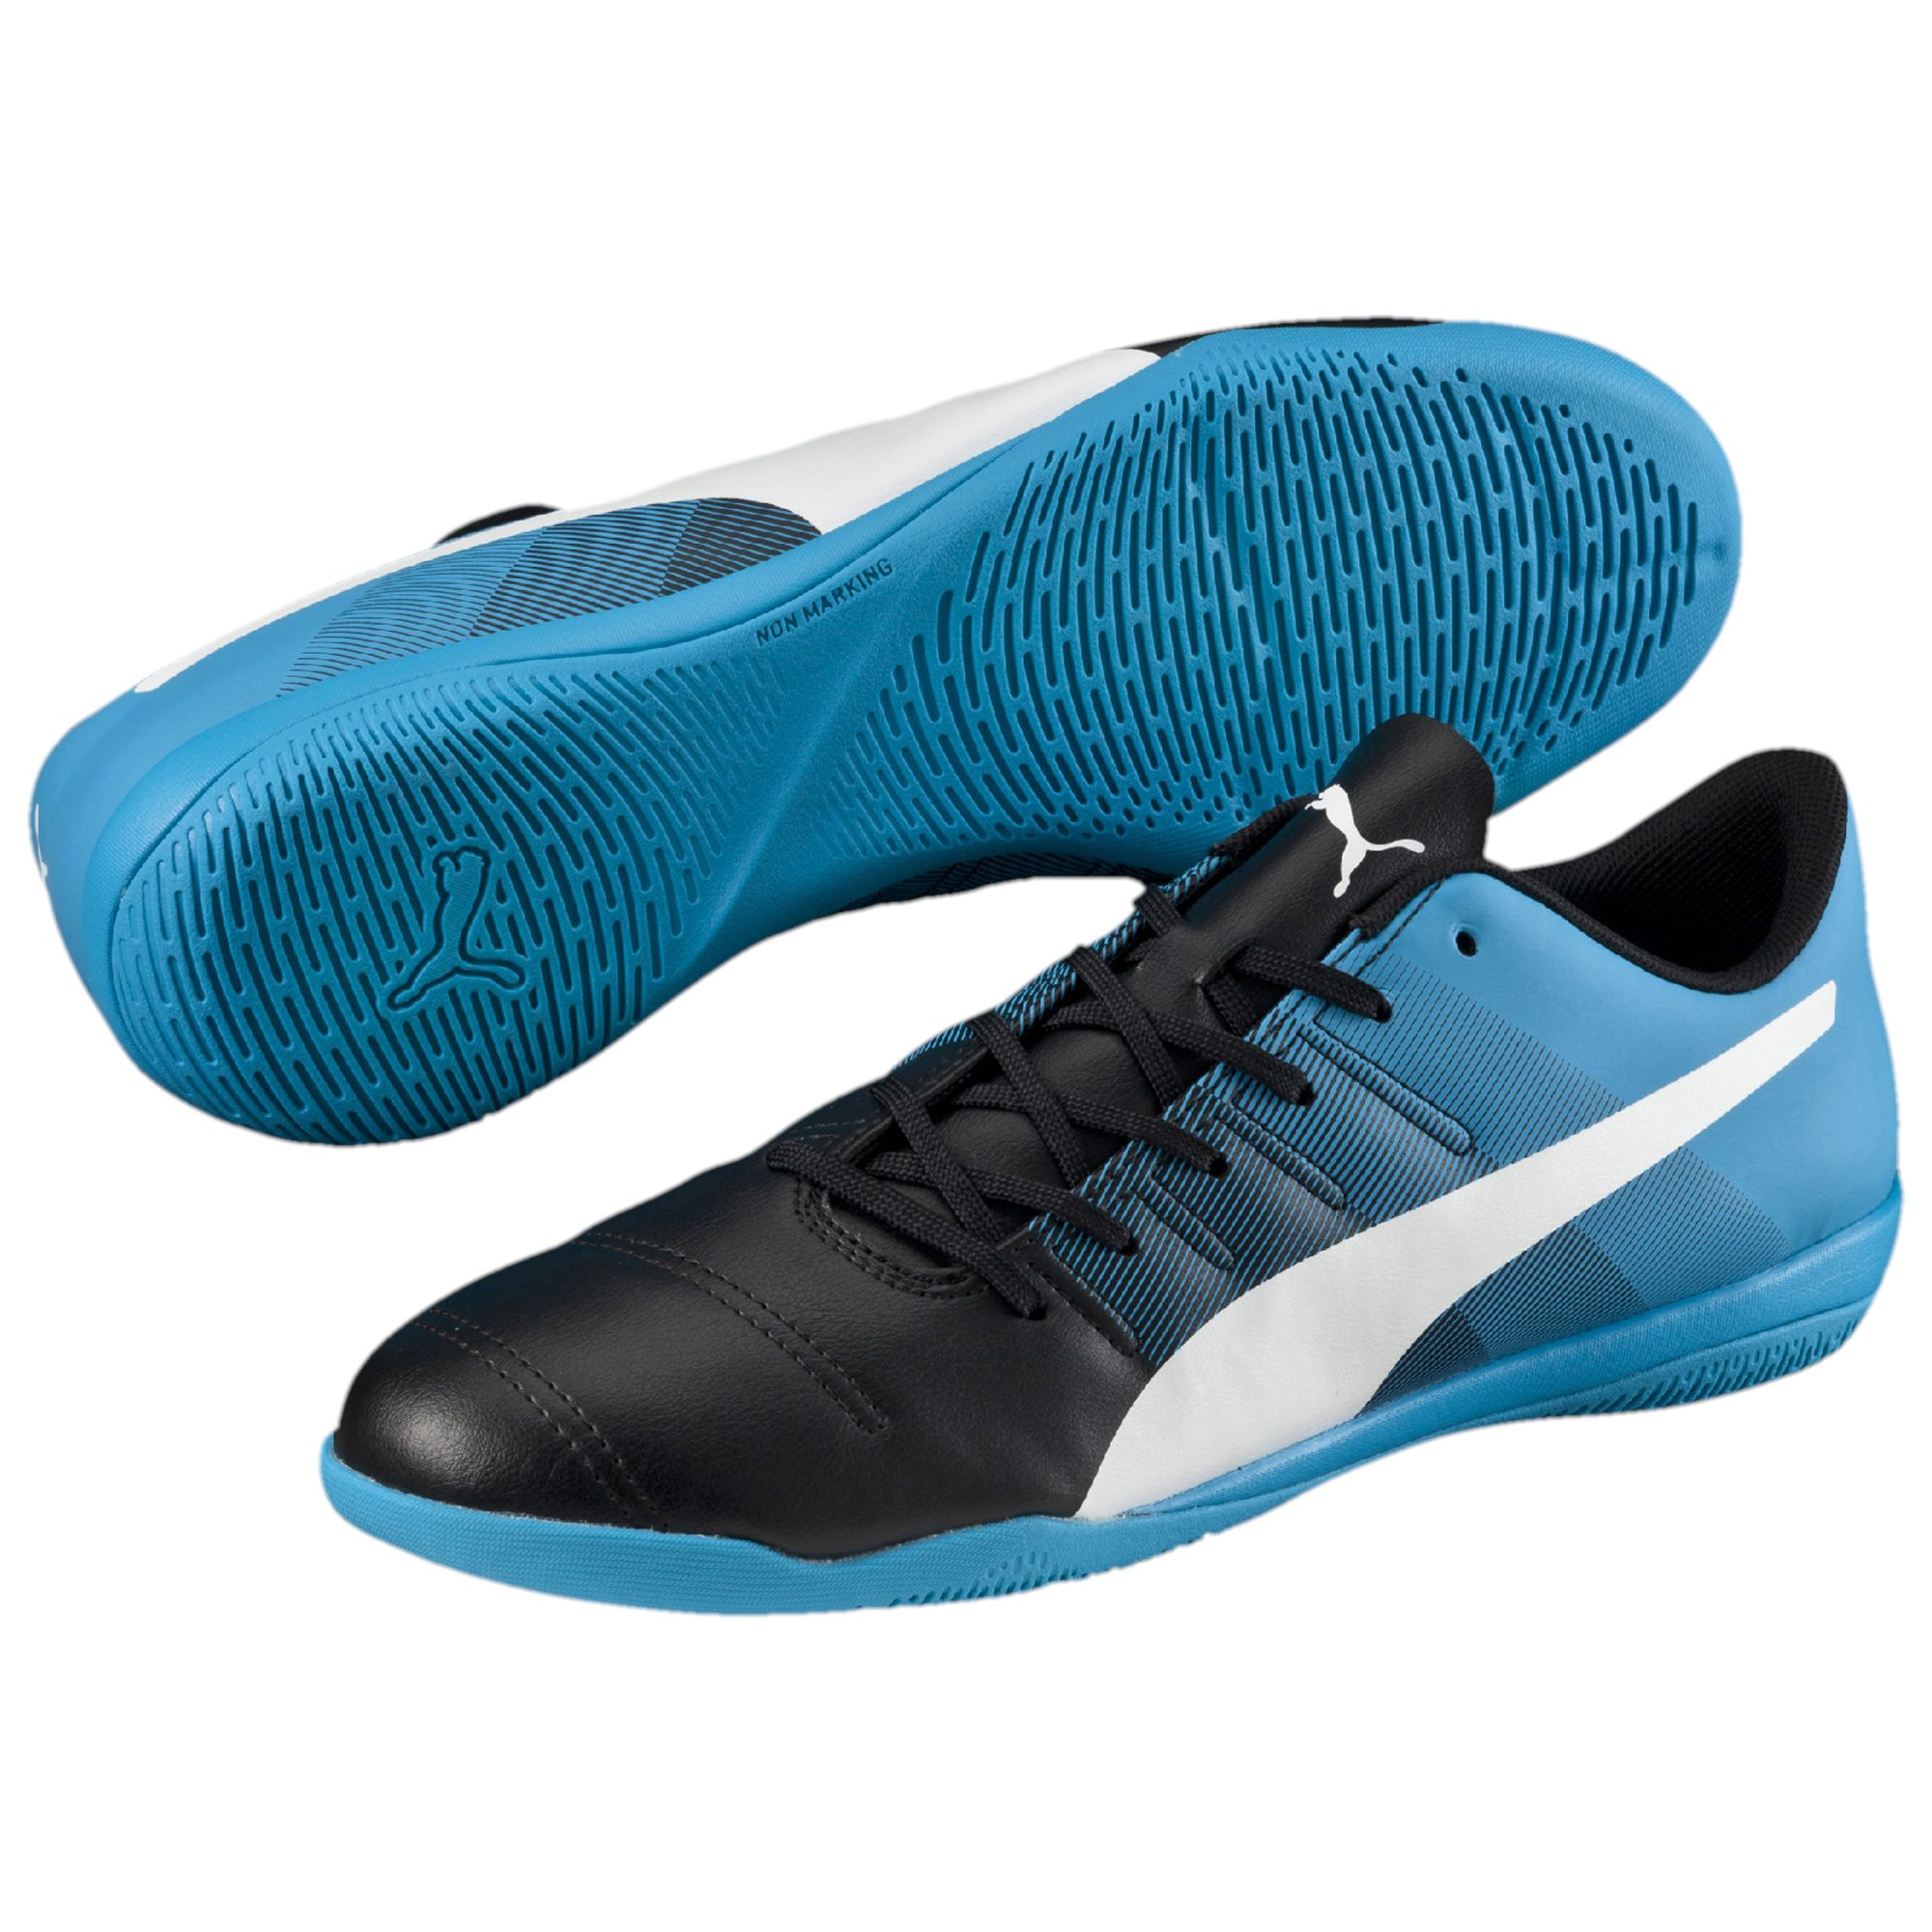 puma indoor soccer shoes pink and blue